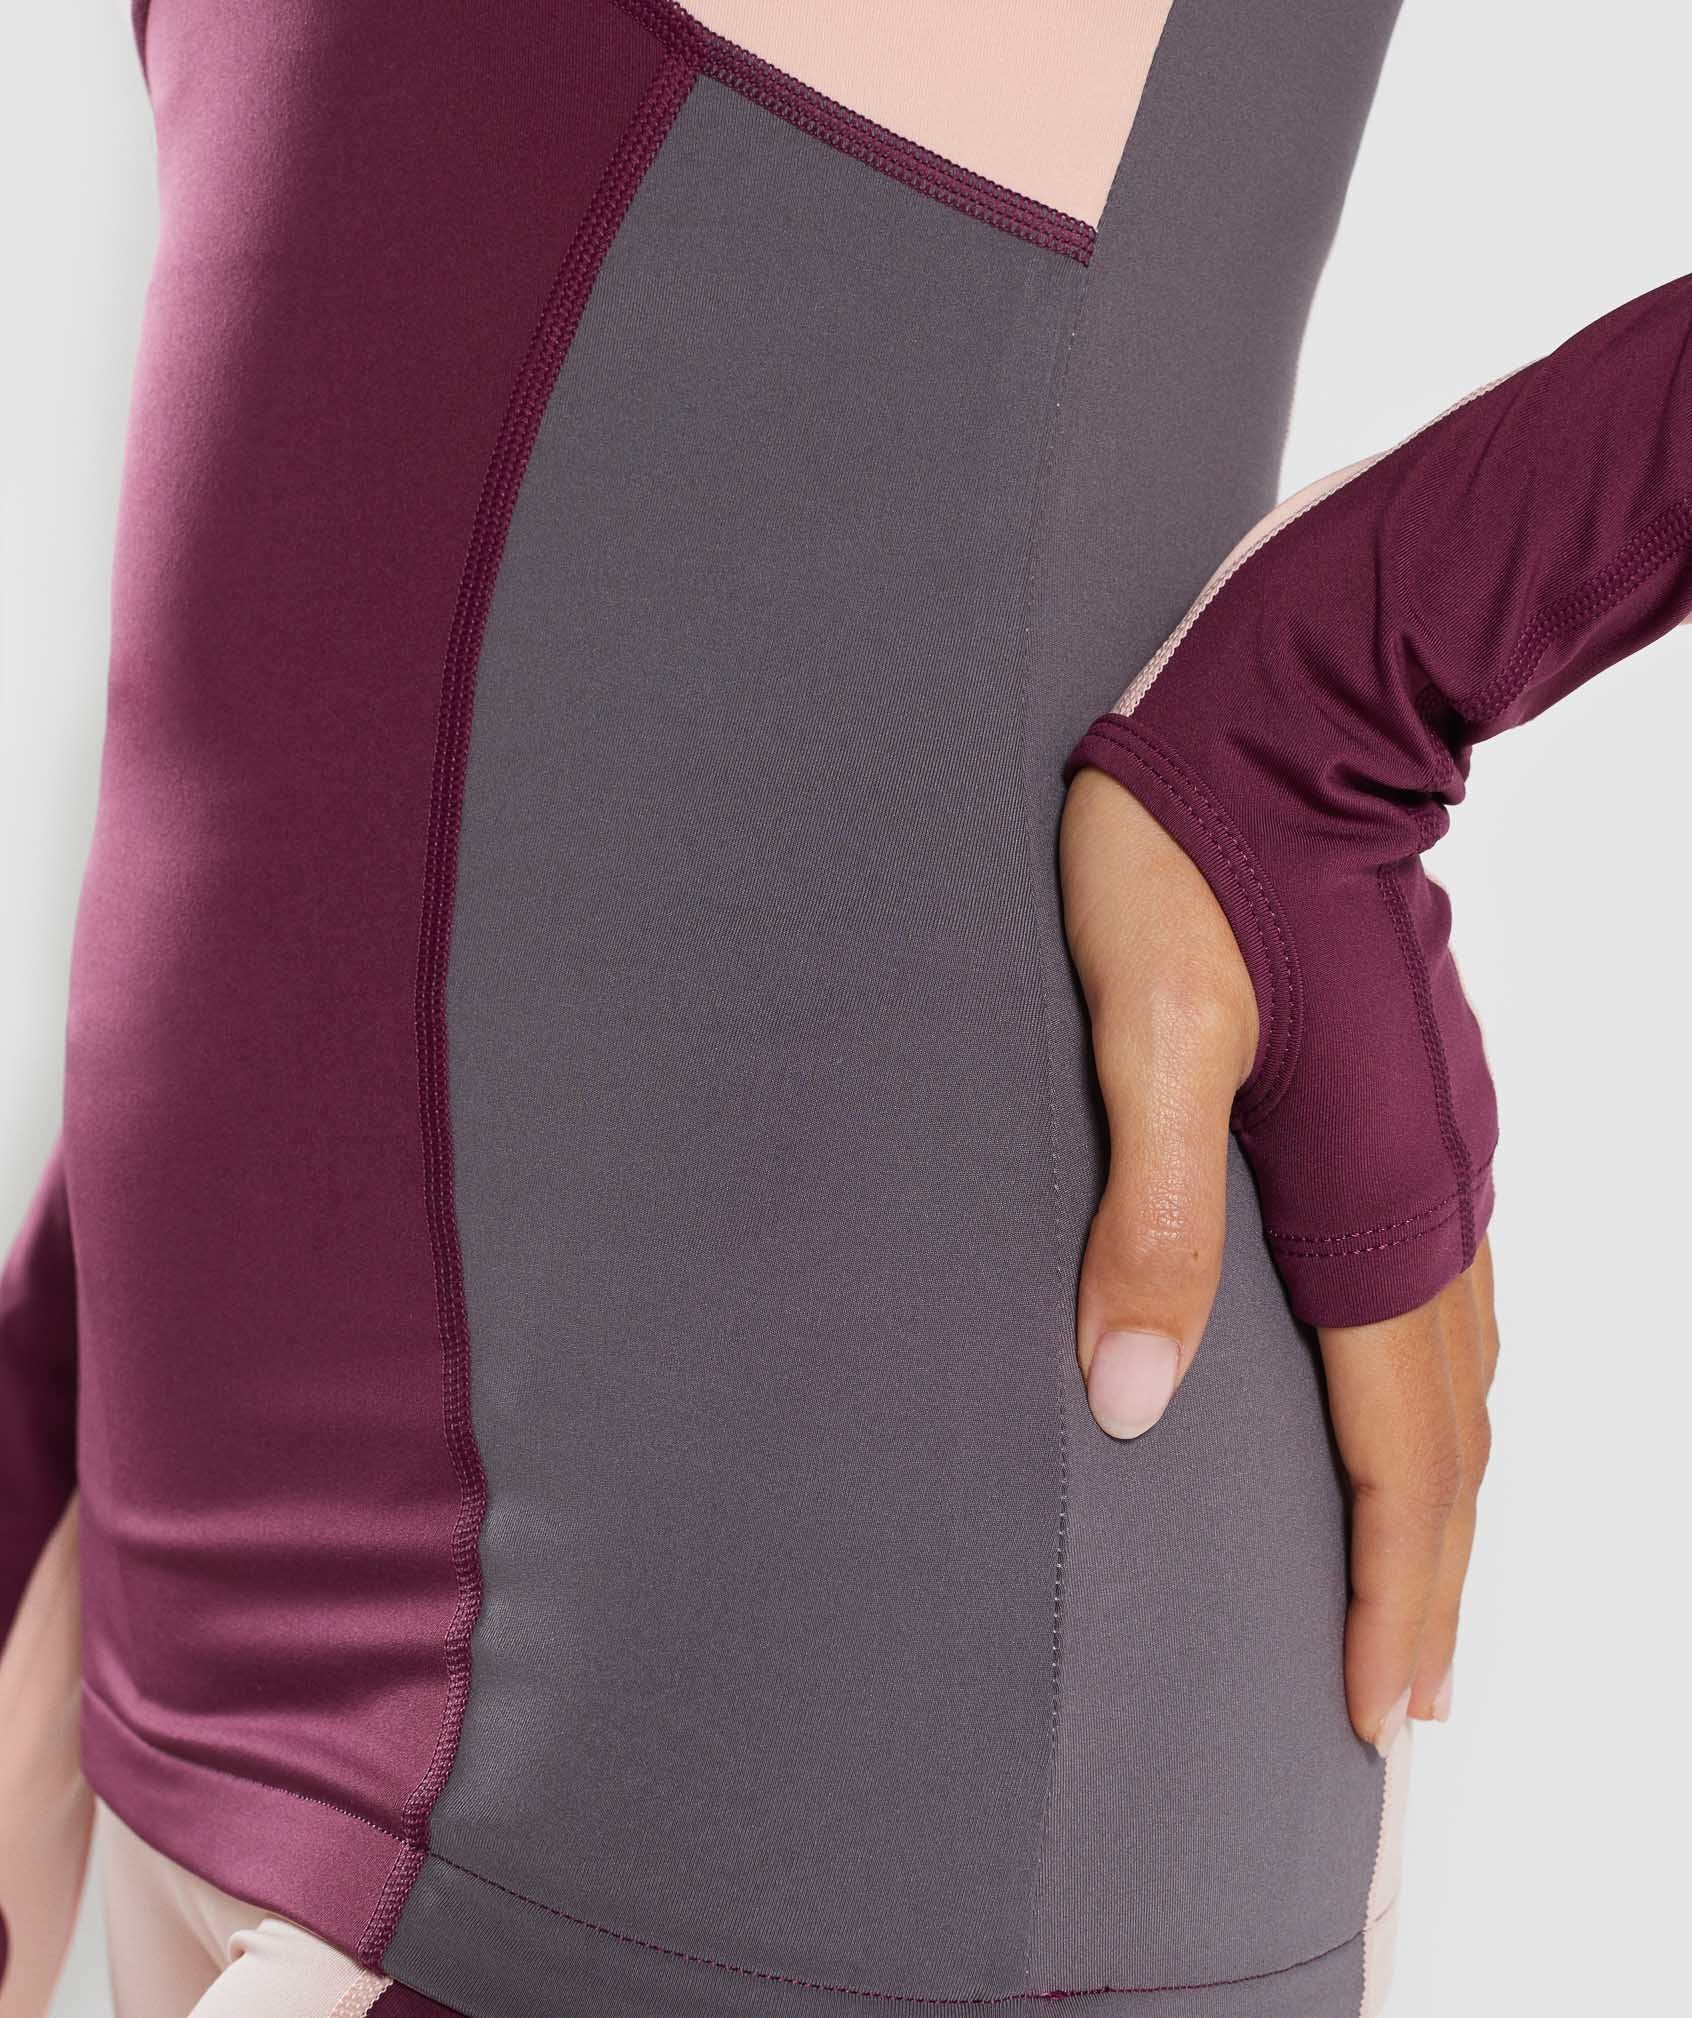 Illusion Long Sleeve Top in Dark Ruby/Blush Nude/Slate Lavender - view 6